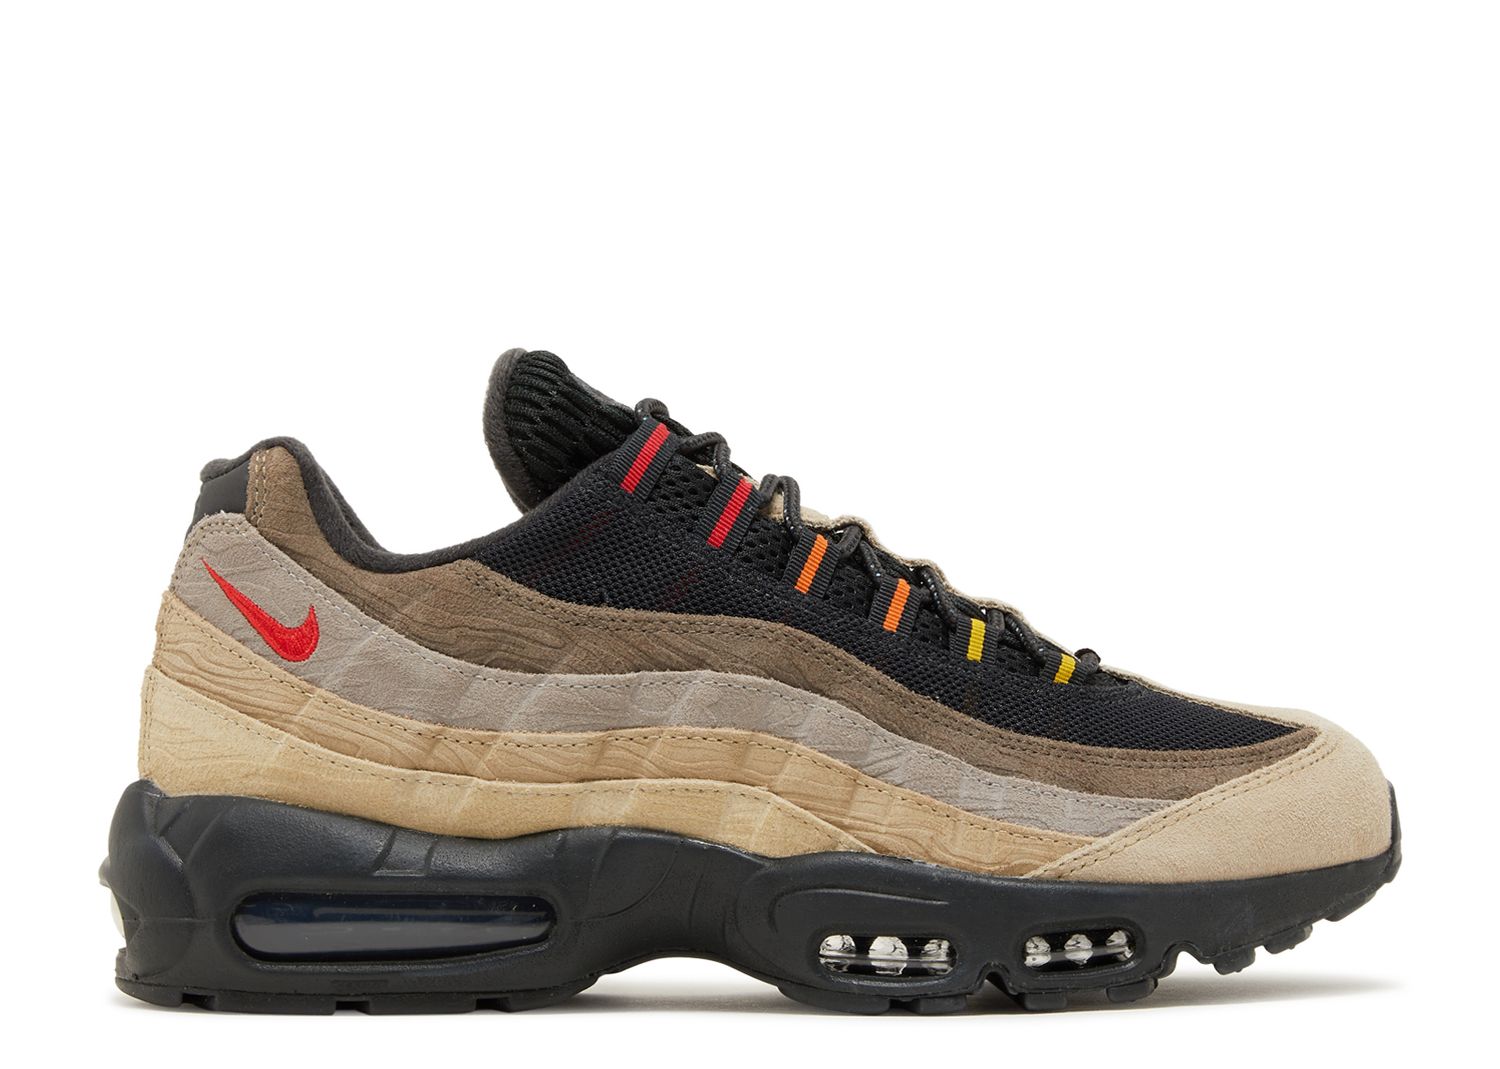 Air Max 95 'Topographic' - Nike - DV3197 001 - off noir/university red ...